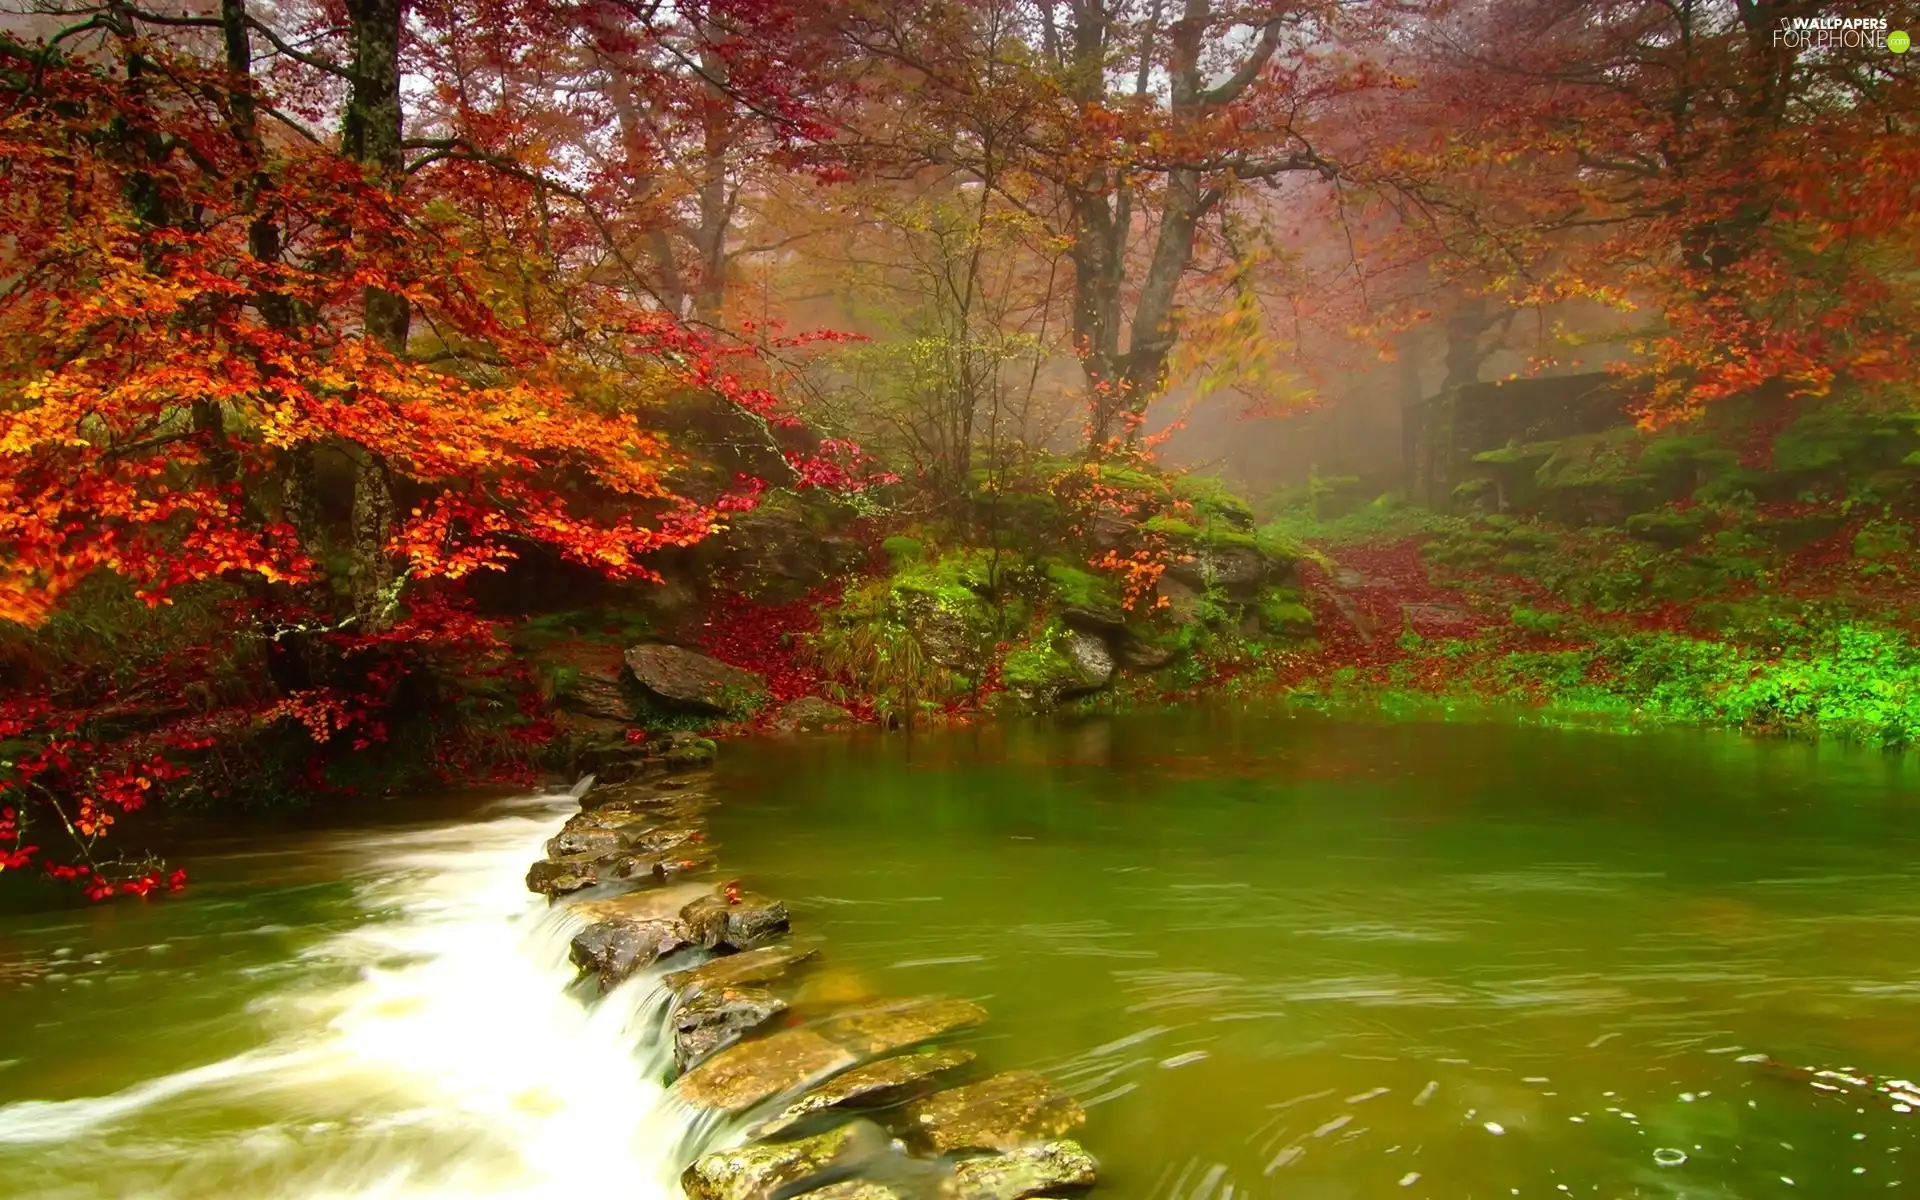 Red, Leaf, Green, water, River